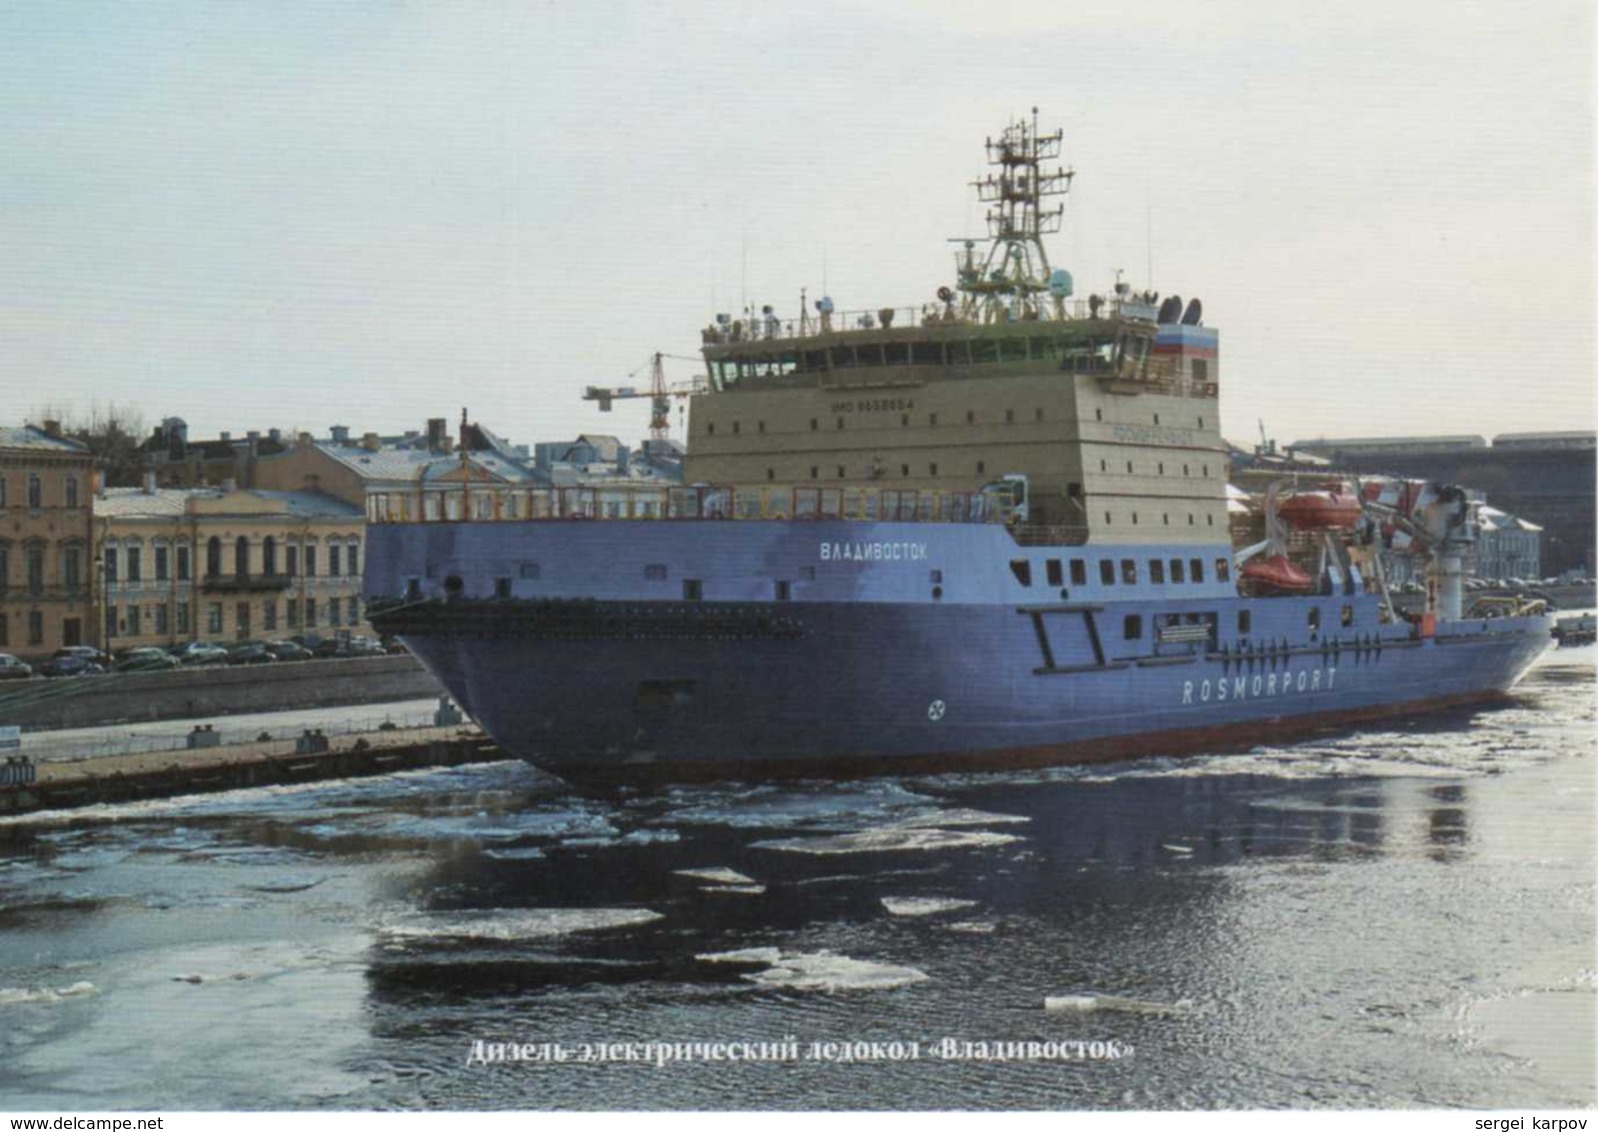 Icebreakers (Russia, 2016), Nuclear and Diesel-Electric